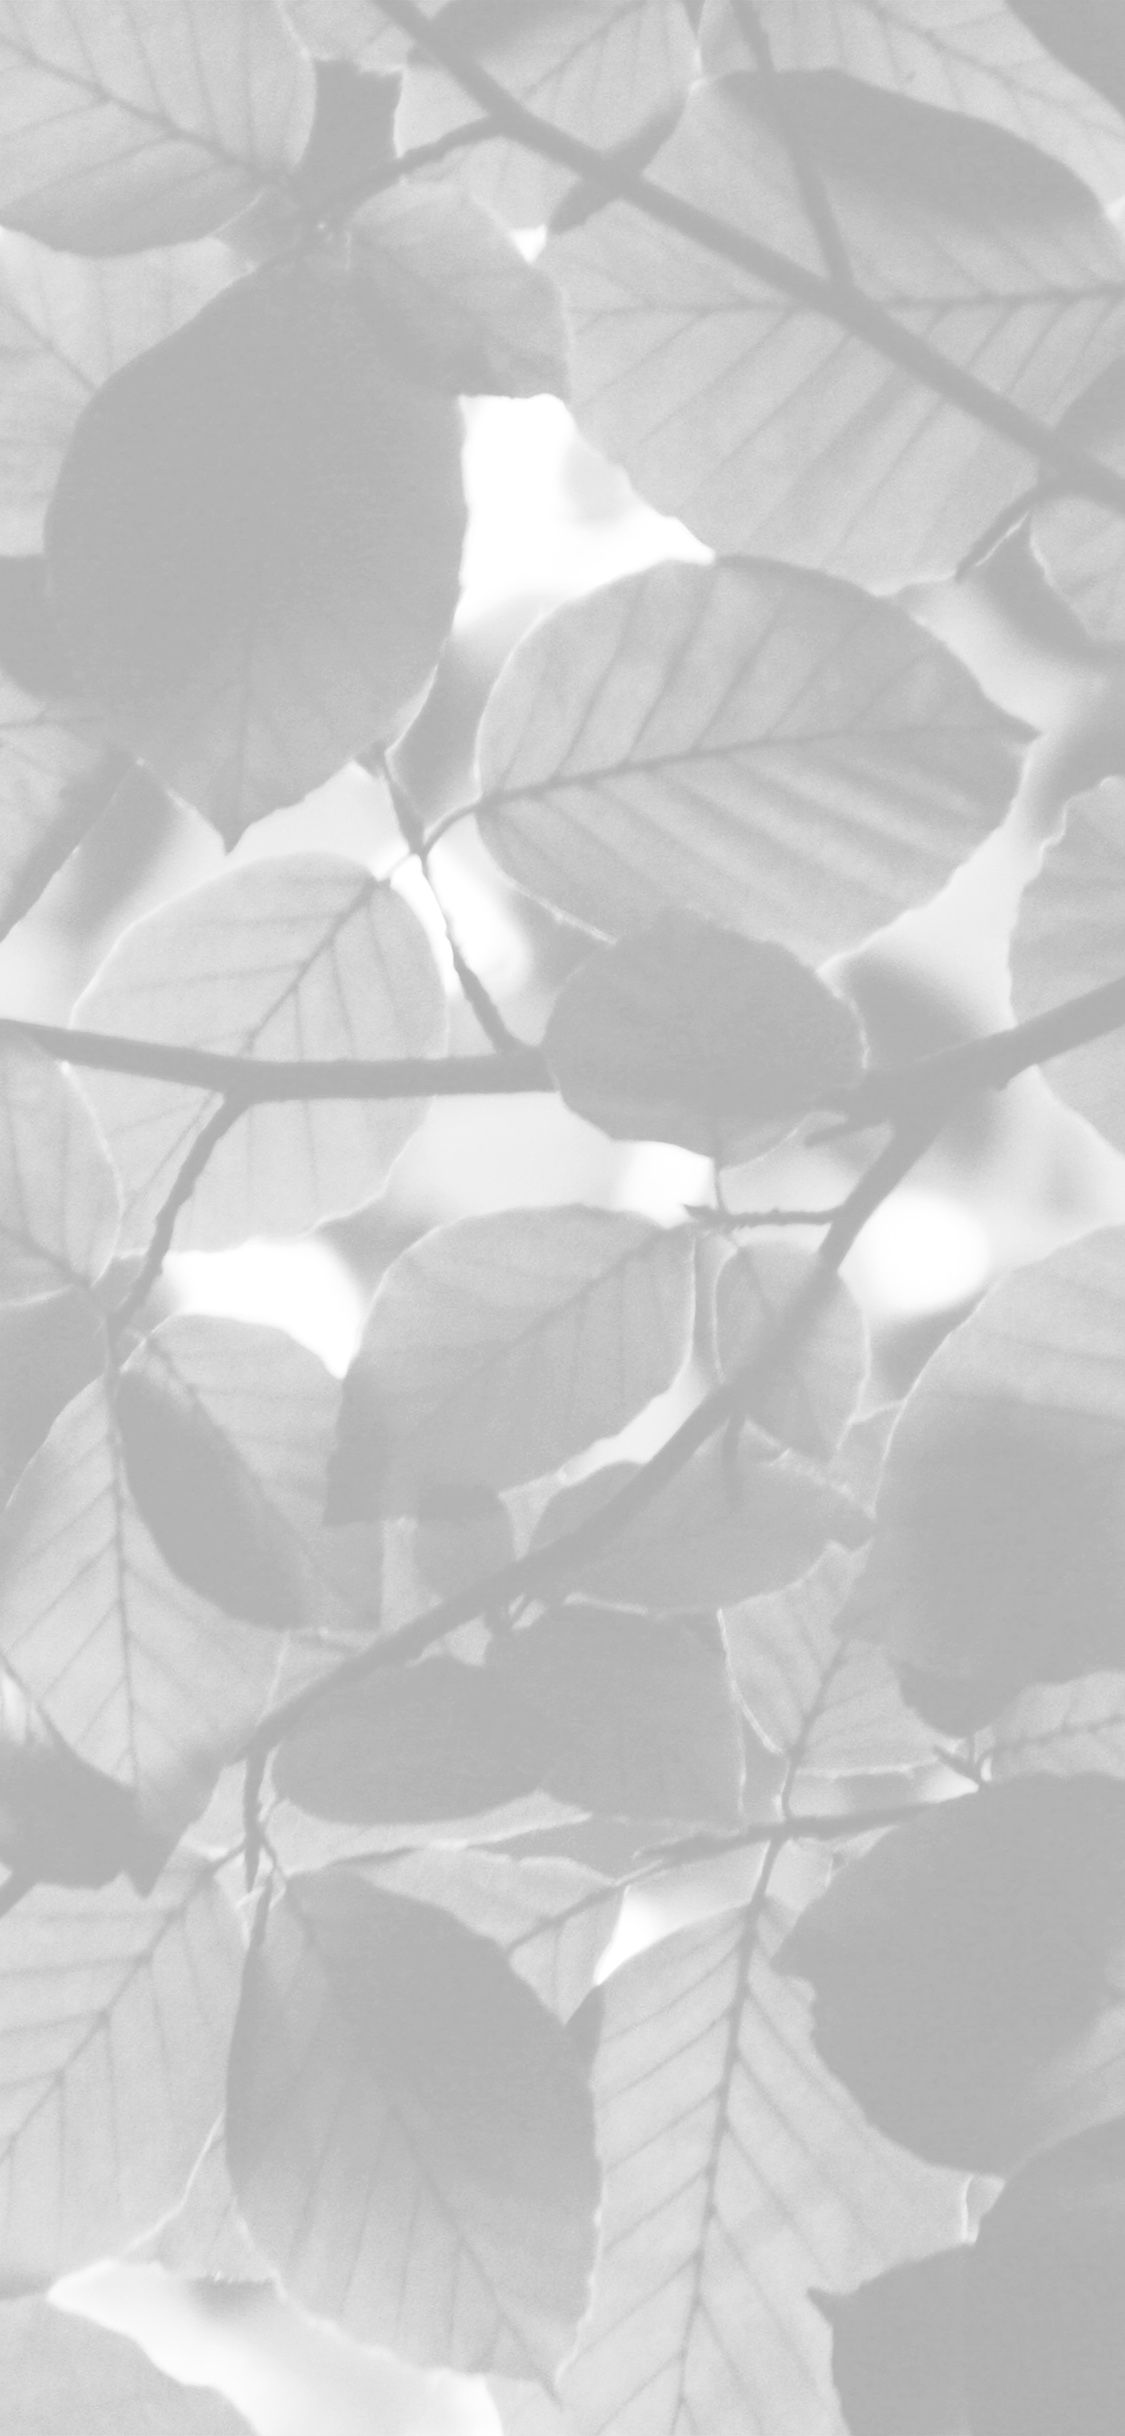 A black and white photo of leaves and their shadows - White